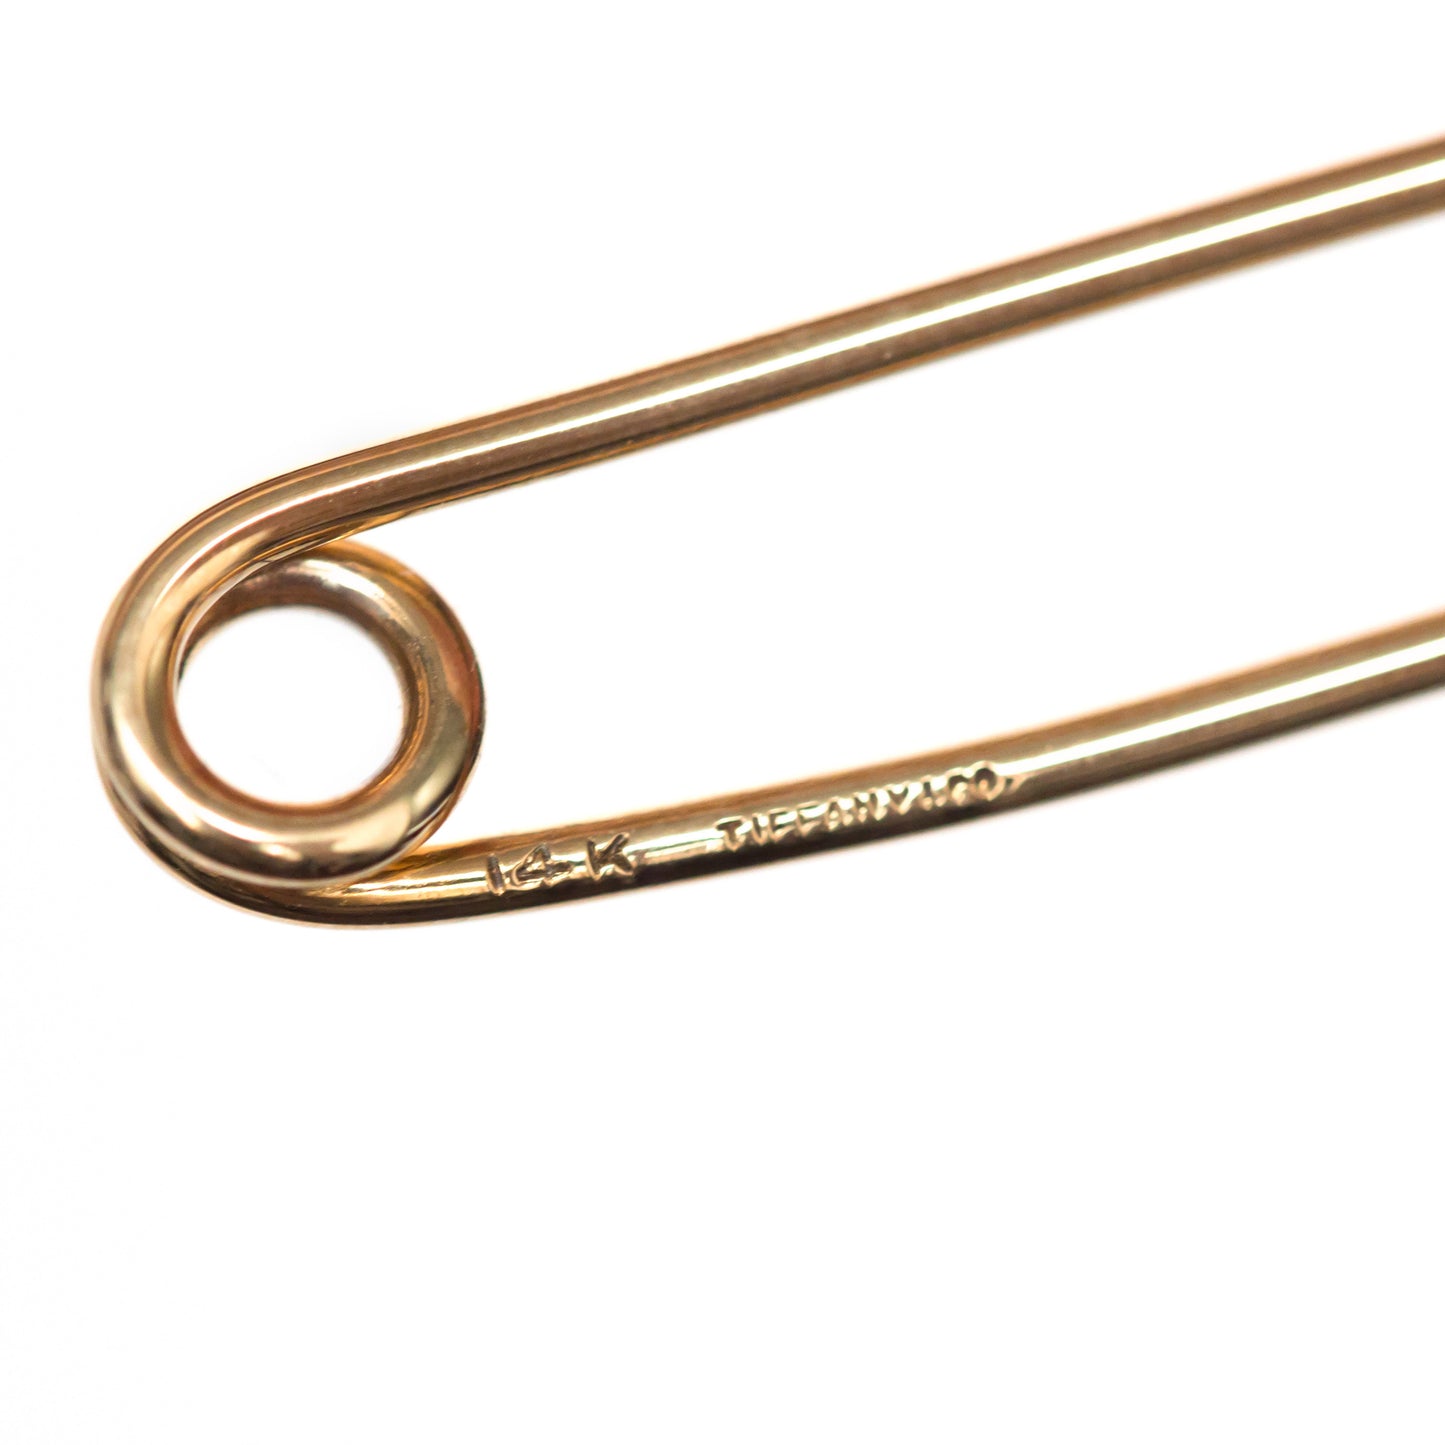 Tiffany & co. Yellow Gold Safety Baby Pin